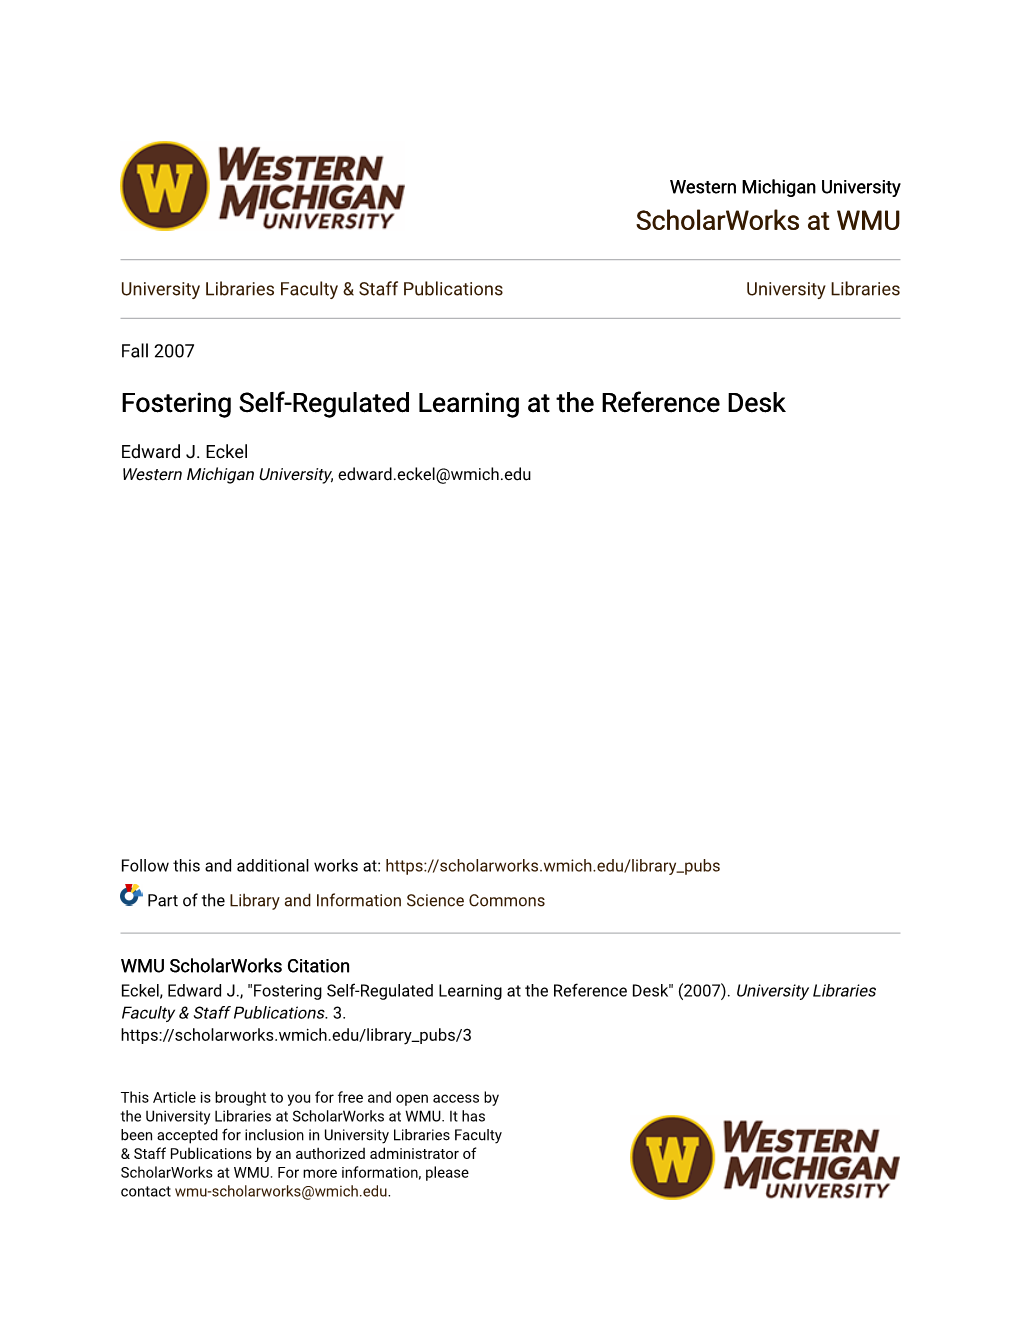 Fostering Self-Regulated Learning at the Reference Desk